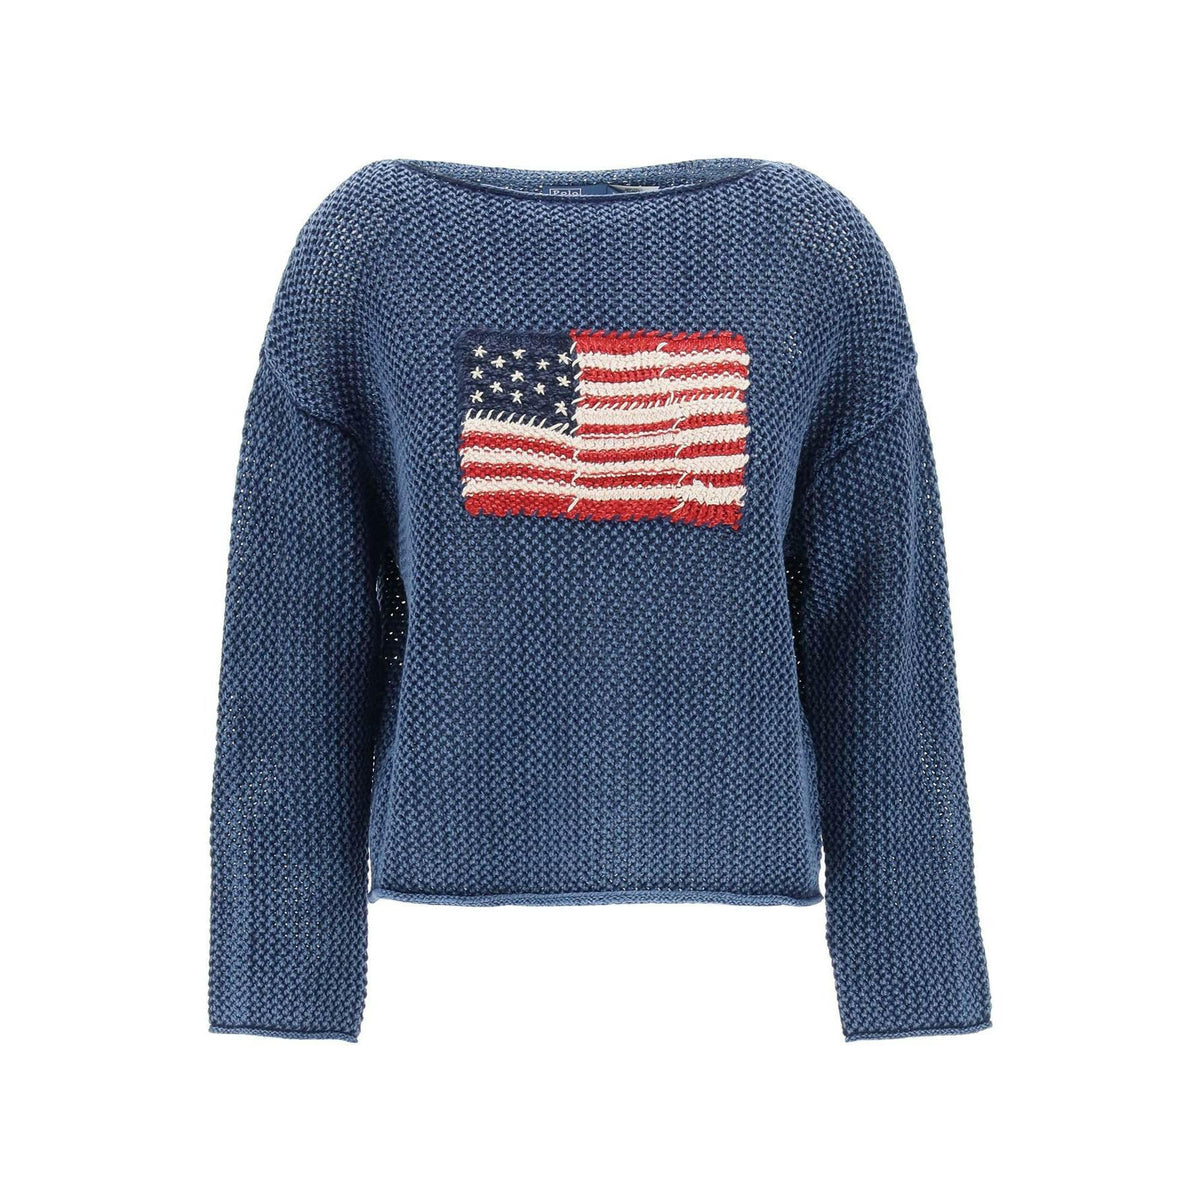 American Flag Knit Boat Neck Sweater